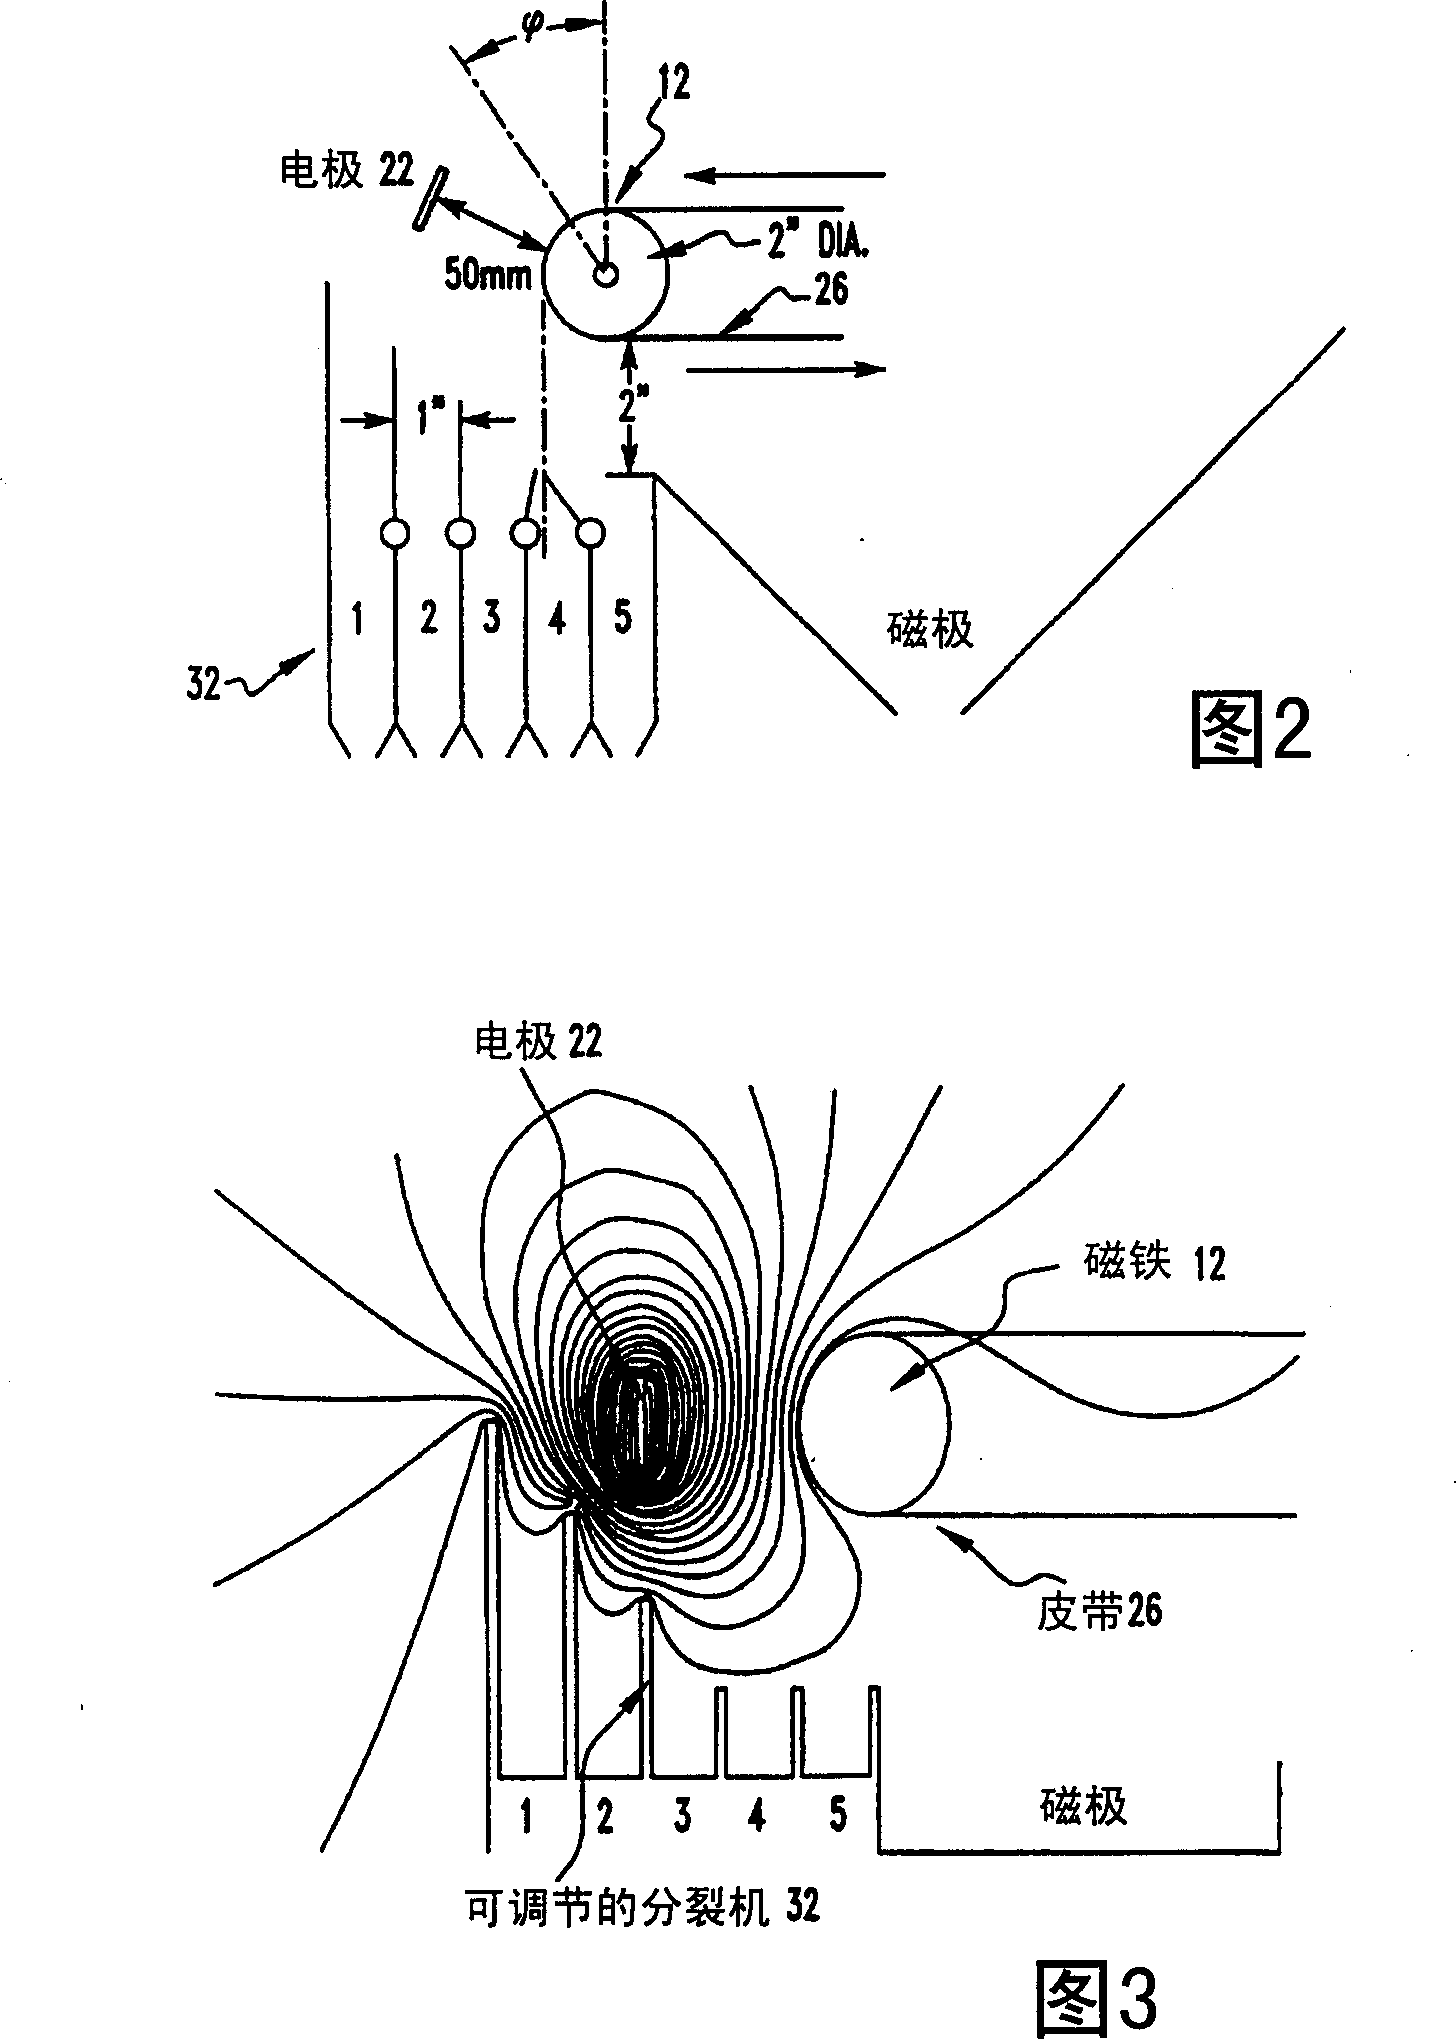 Method and apparatus for sorting particles with electric and magnetic forces